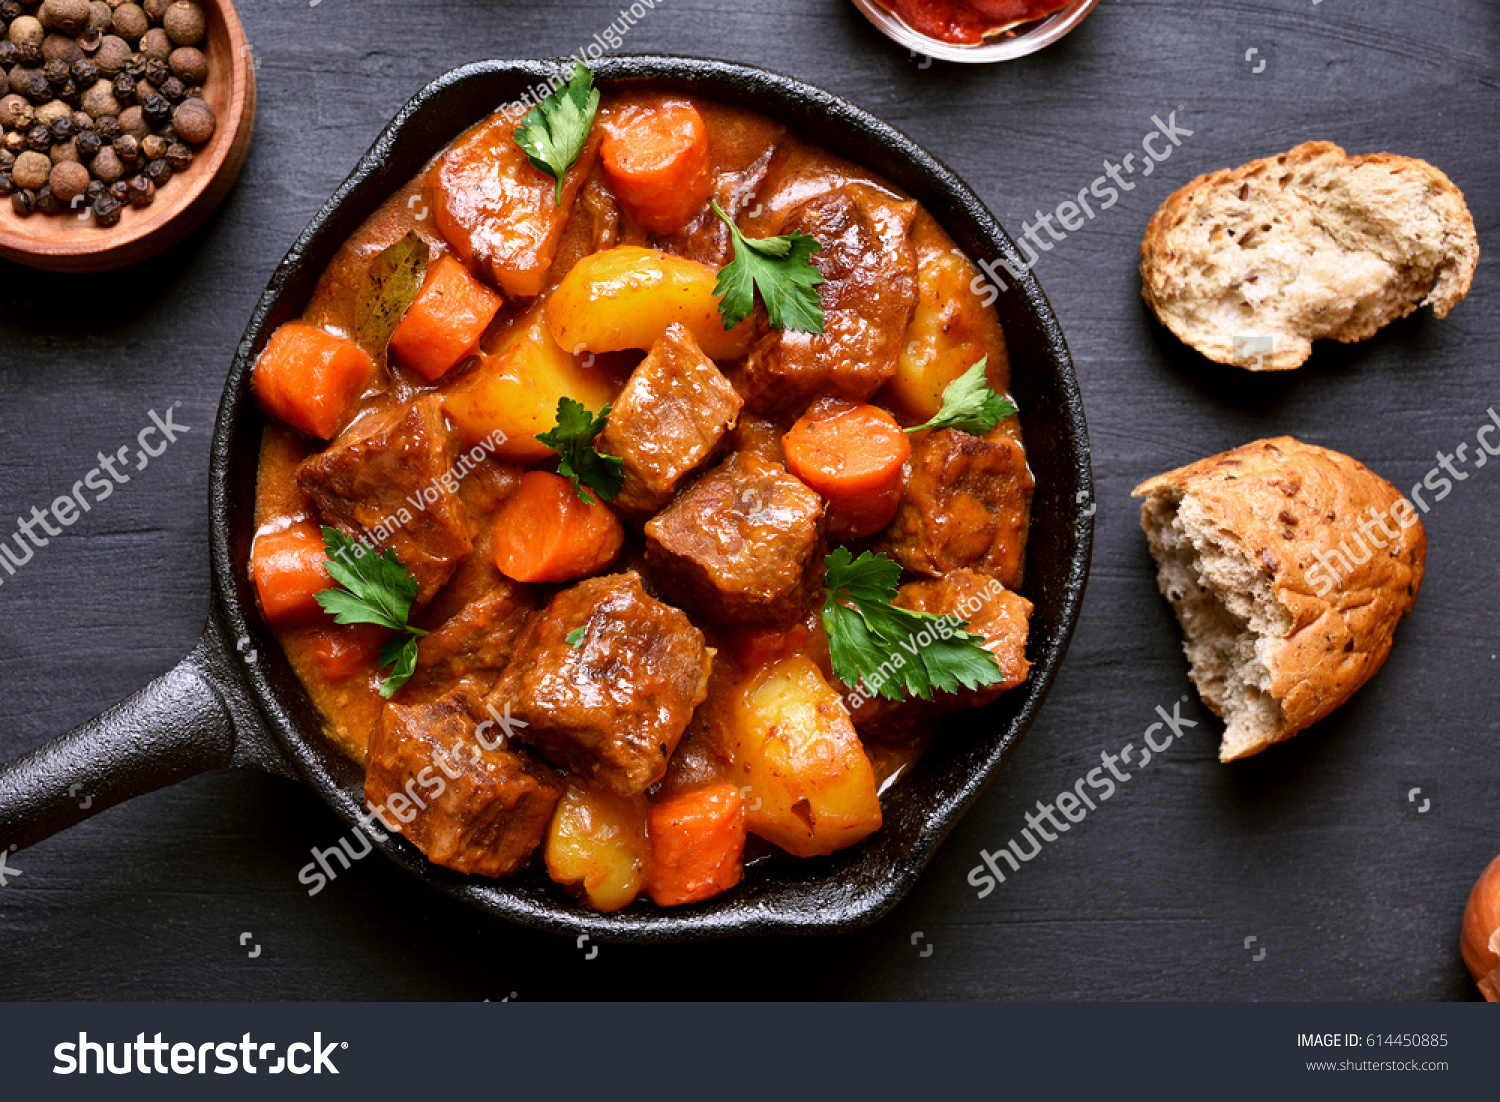 Goulash, beef stew in cast iron pan on dark background, top view, close up #614450885